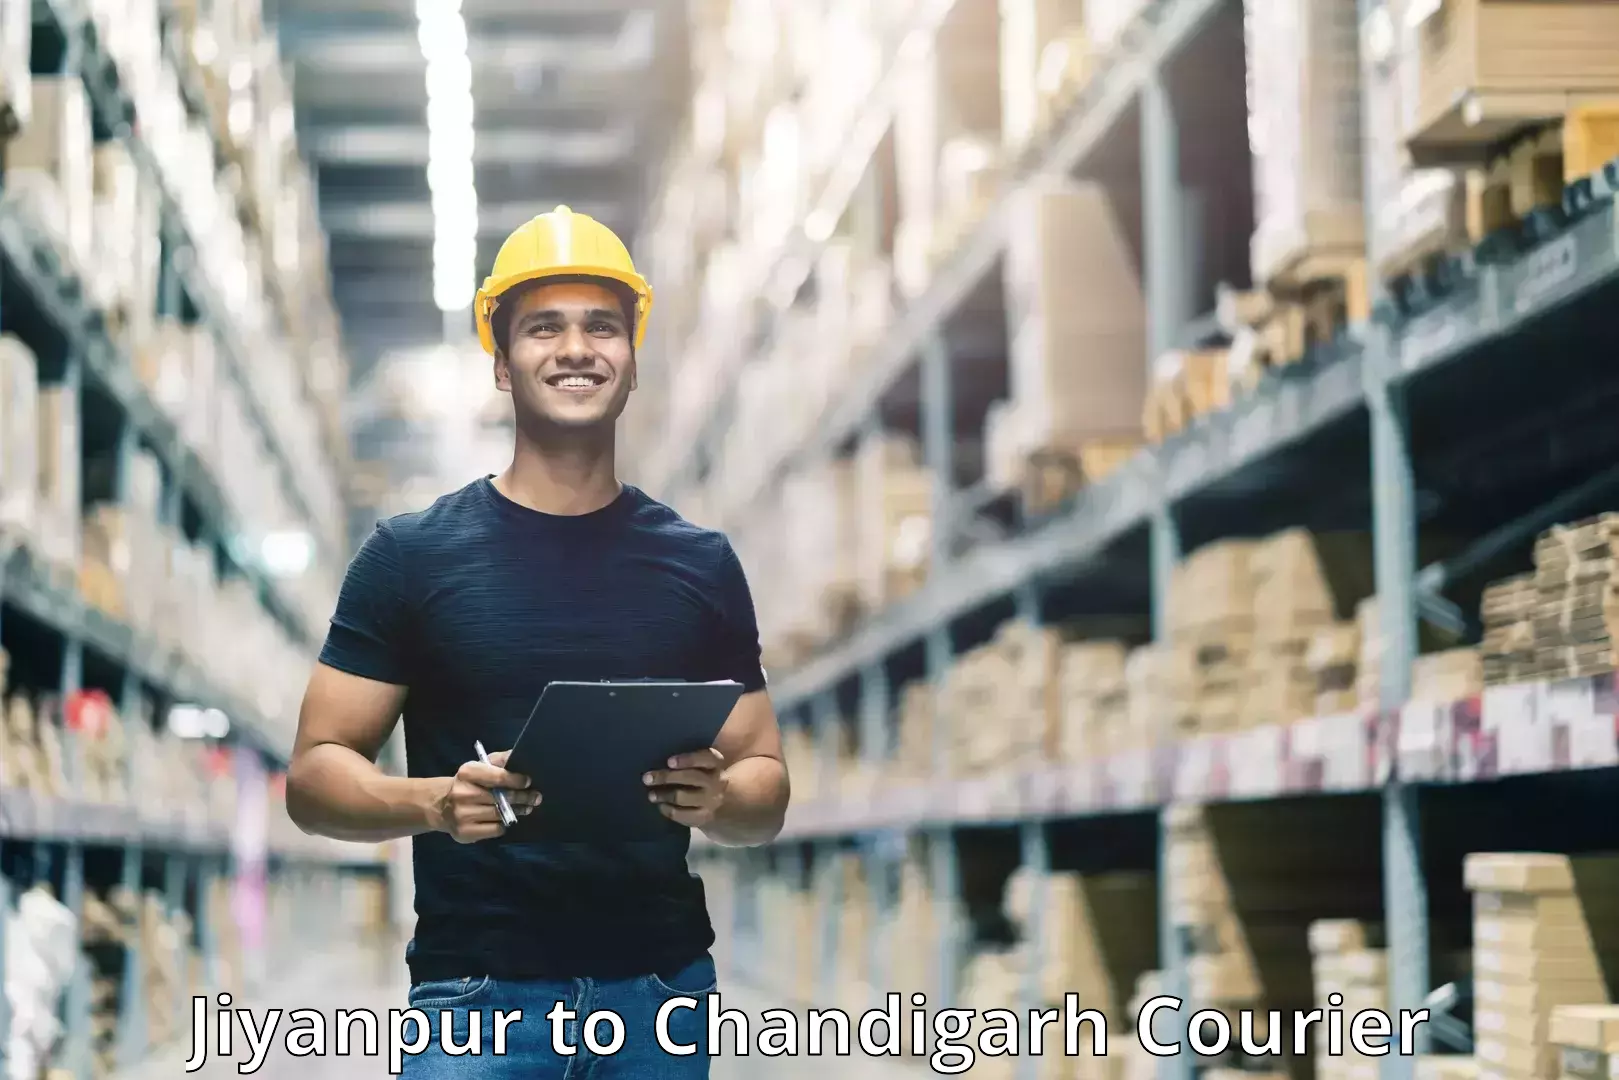 Courier rate comparison in Jiyanpur to Chandigarh